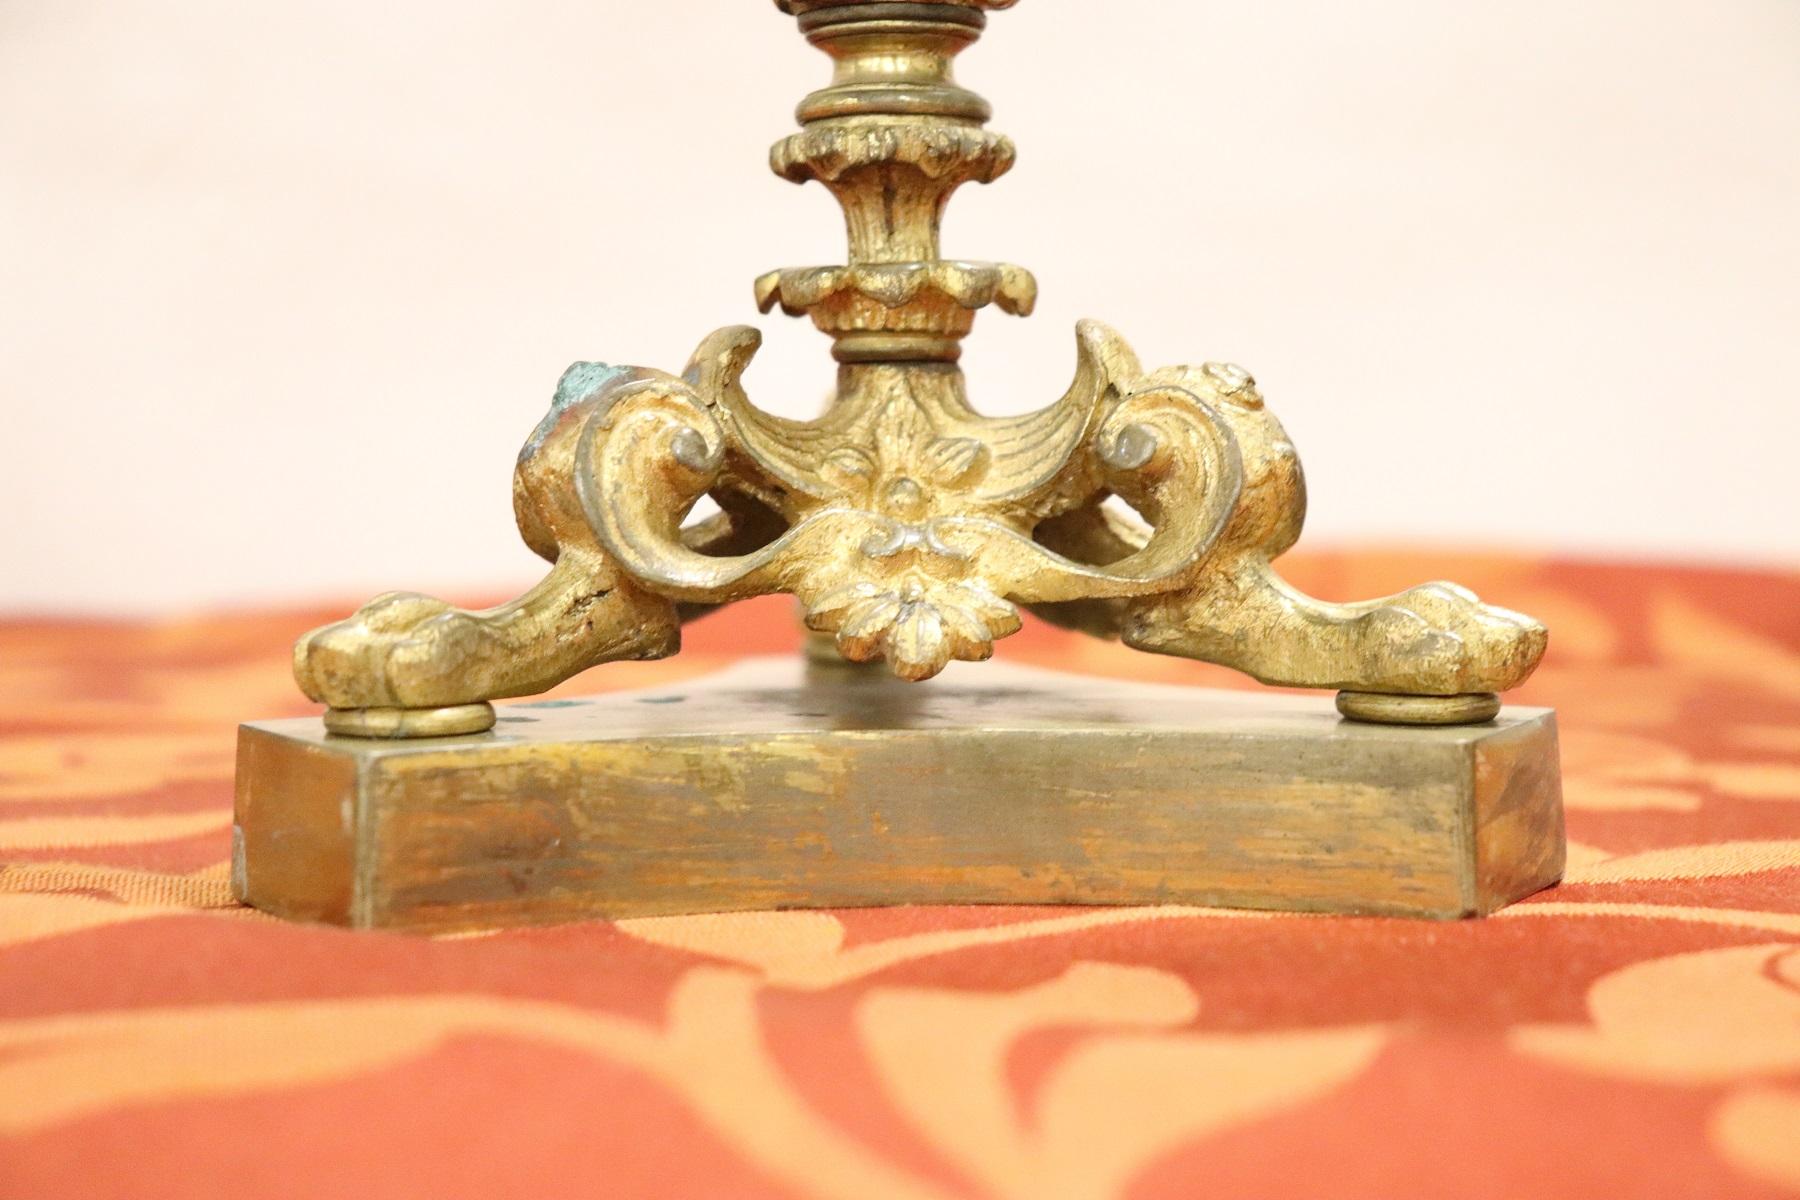 19th Century French Napoleon III Pair of Candelabras in Gilded Bronze 4 Arms 8